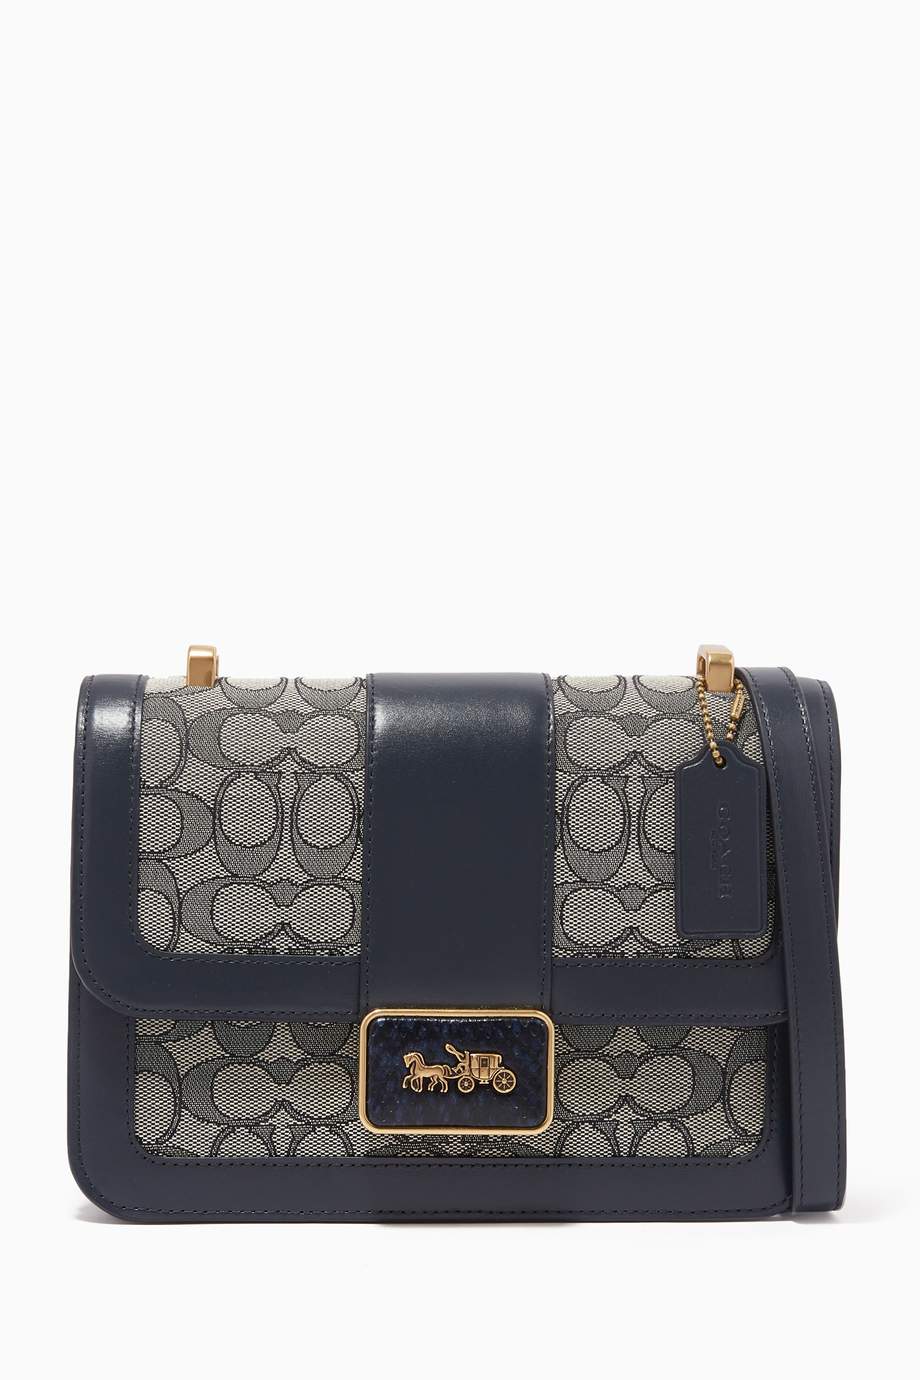 Shop Coach Blue Alie Shoulder Bag in Signature Jacquard and Leather for Women | Ounass UAE